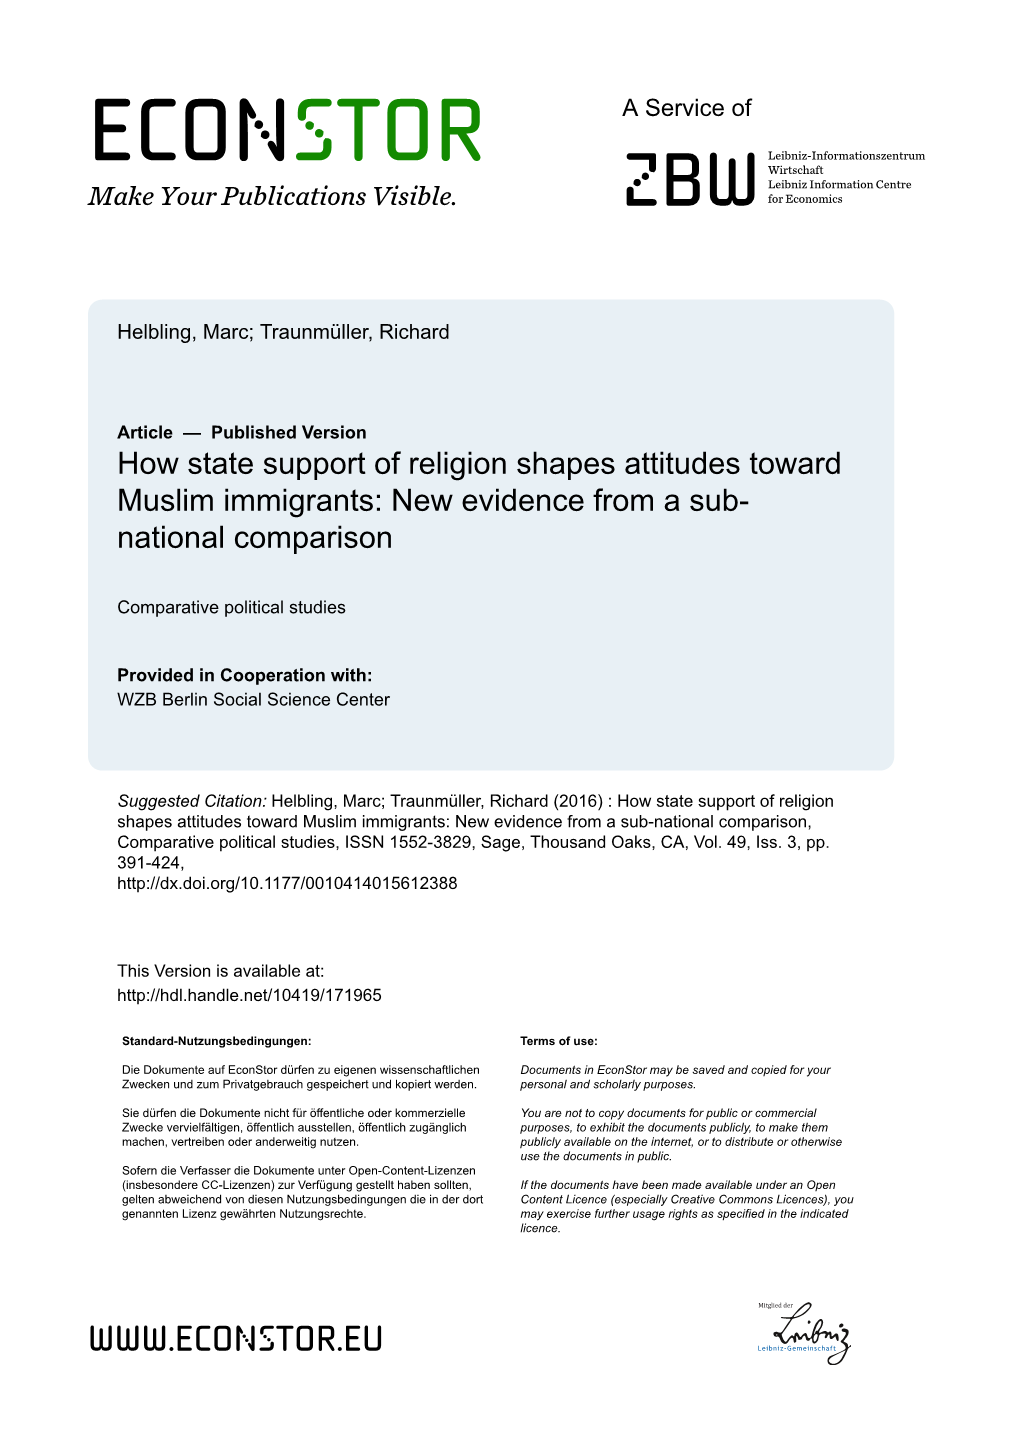 How State Support of Religion Shapes Attitudes Toward Muslim Immigrants: New Evidence from a Sub- National Comparison